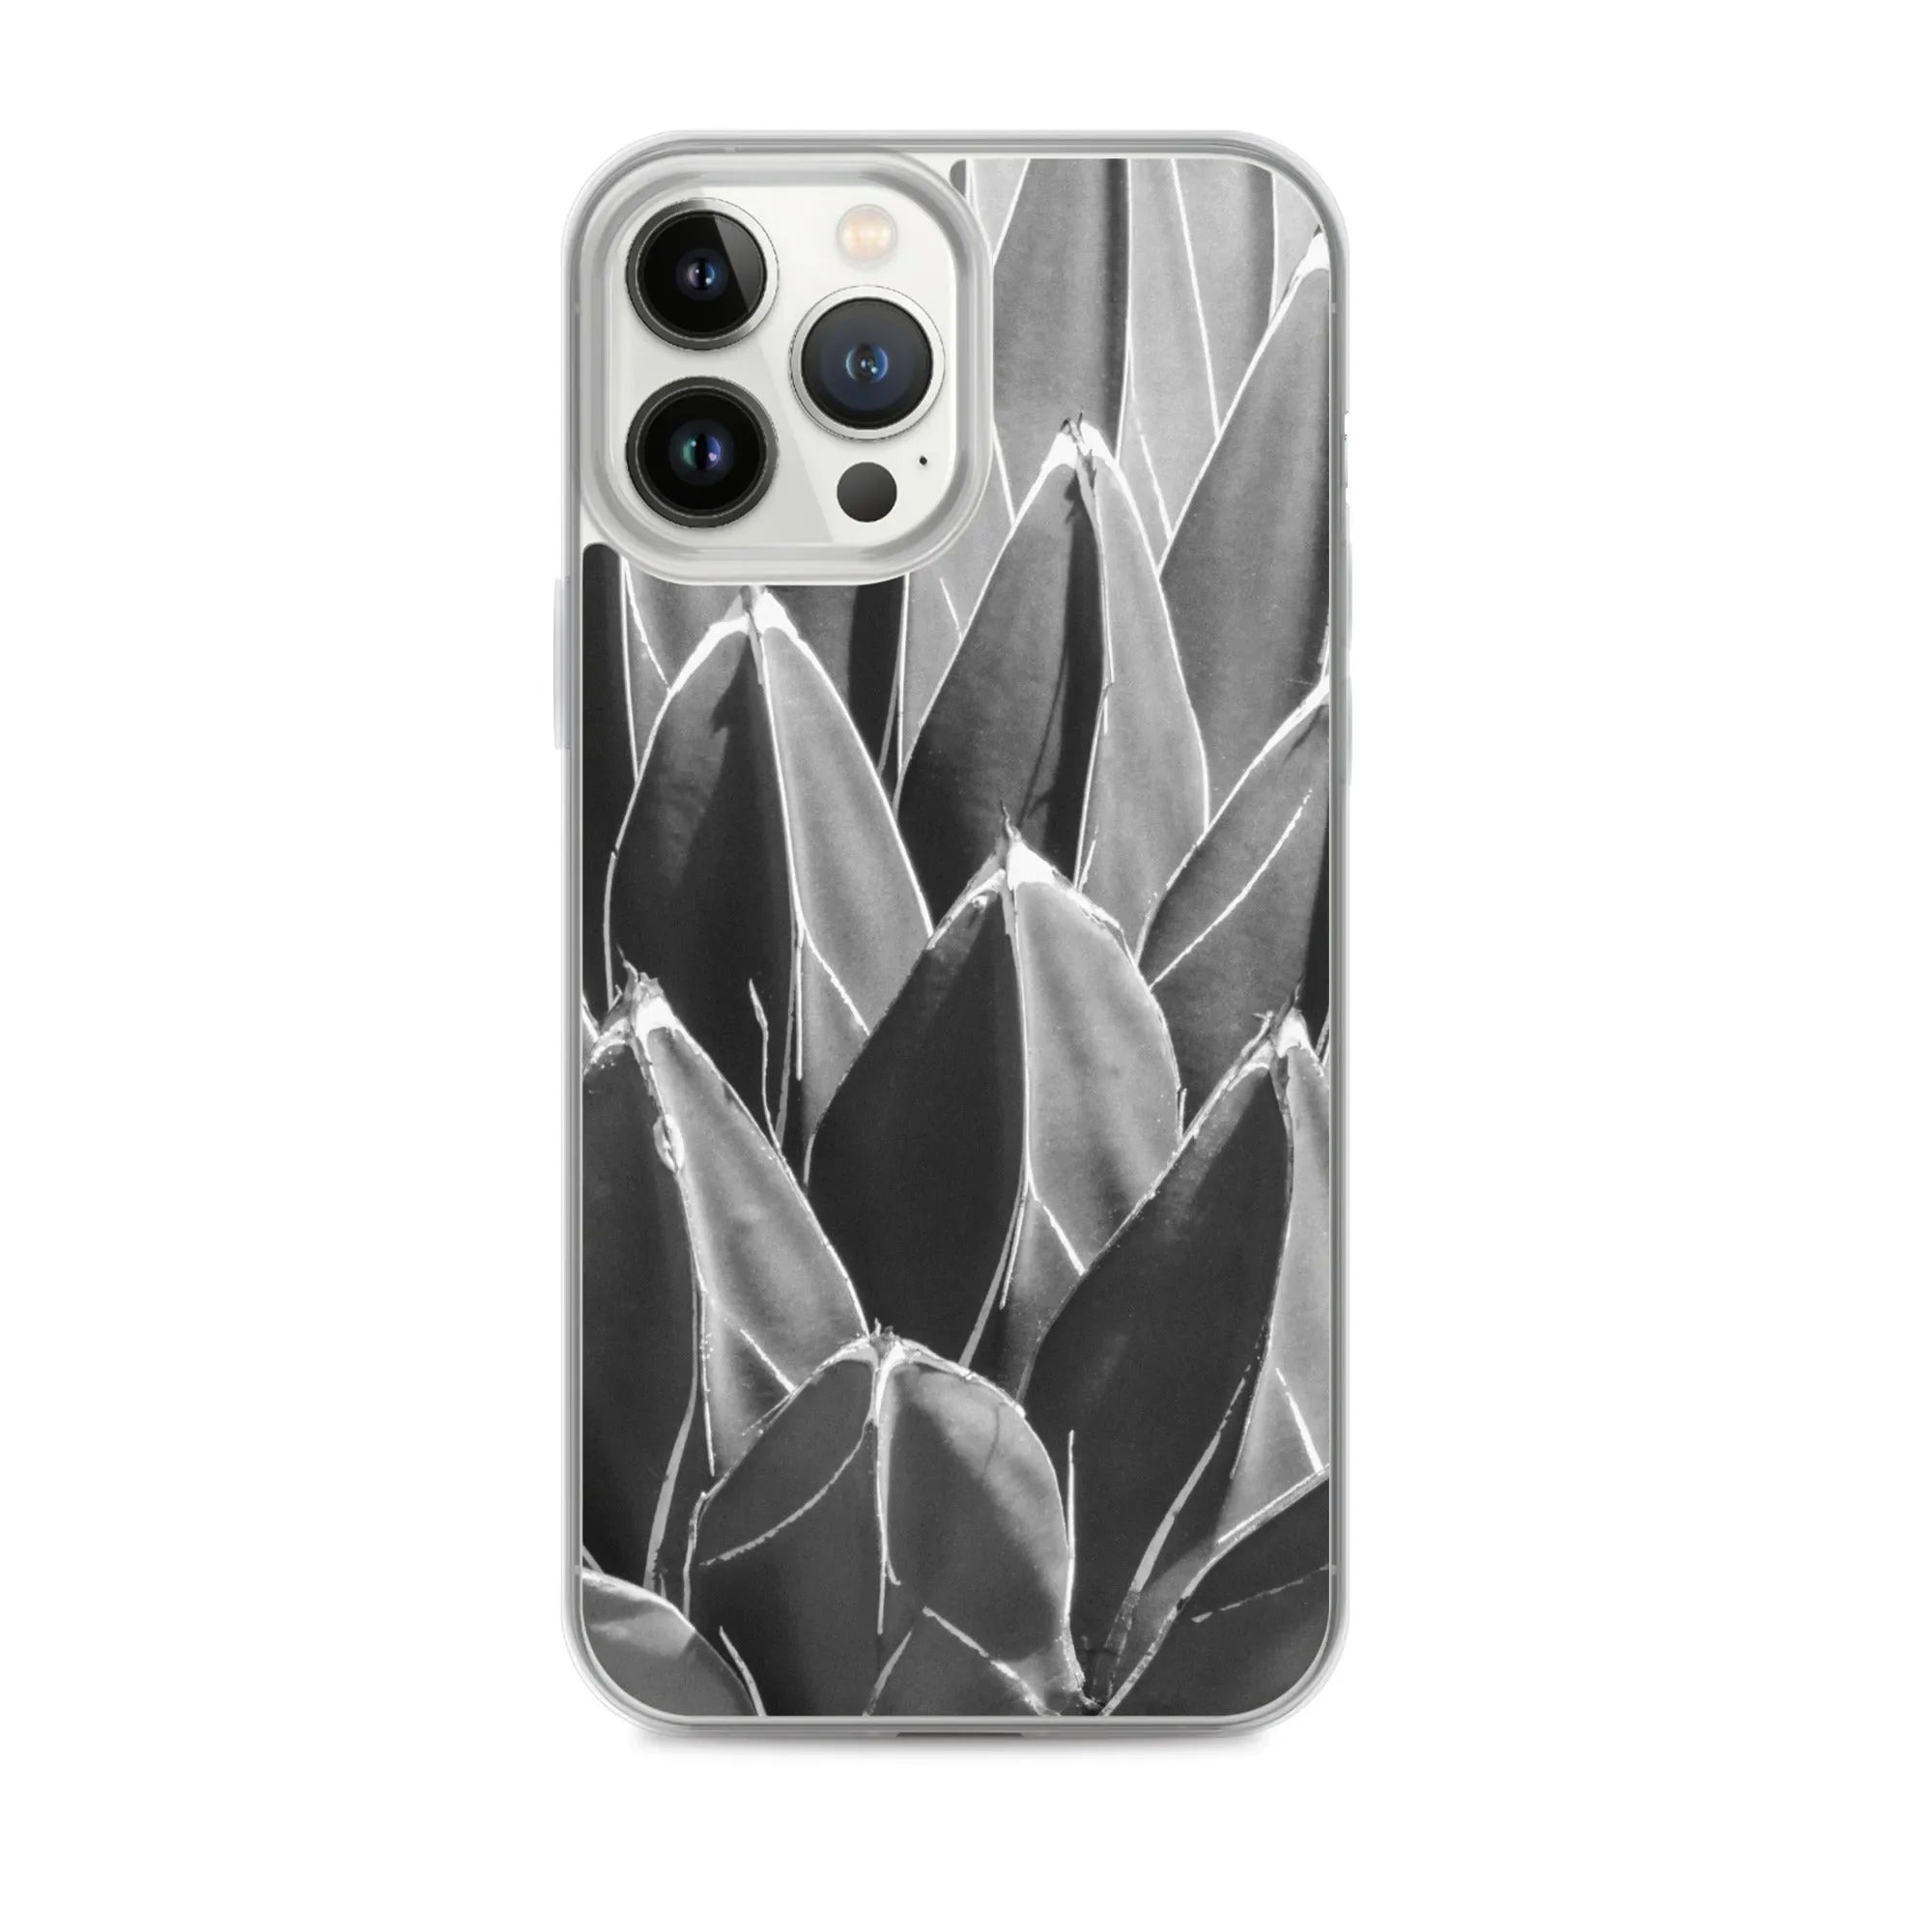 Decked Out Botanical Art Iphone Case - black And White - Iphone 13 Pro Max - Mobile Phone Cases - Aesthetic Art